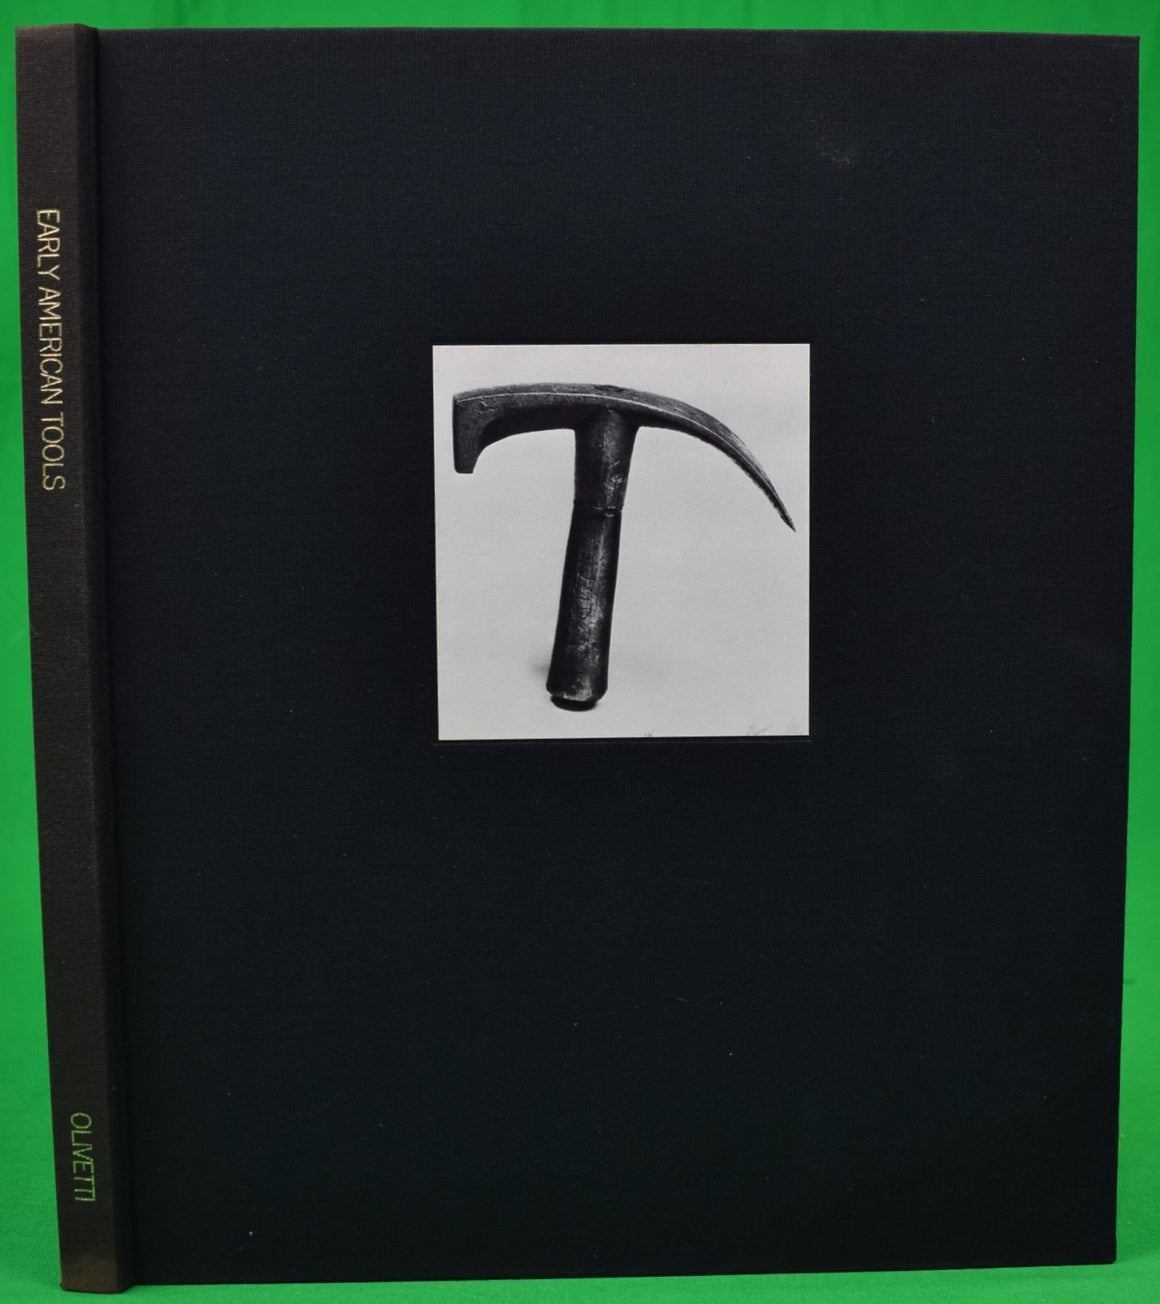 "Early American Tools" 1975 NAMUTH, Hans [photographs by] and DAVIDSON, Marshall B. [text by]